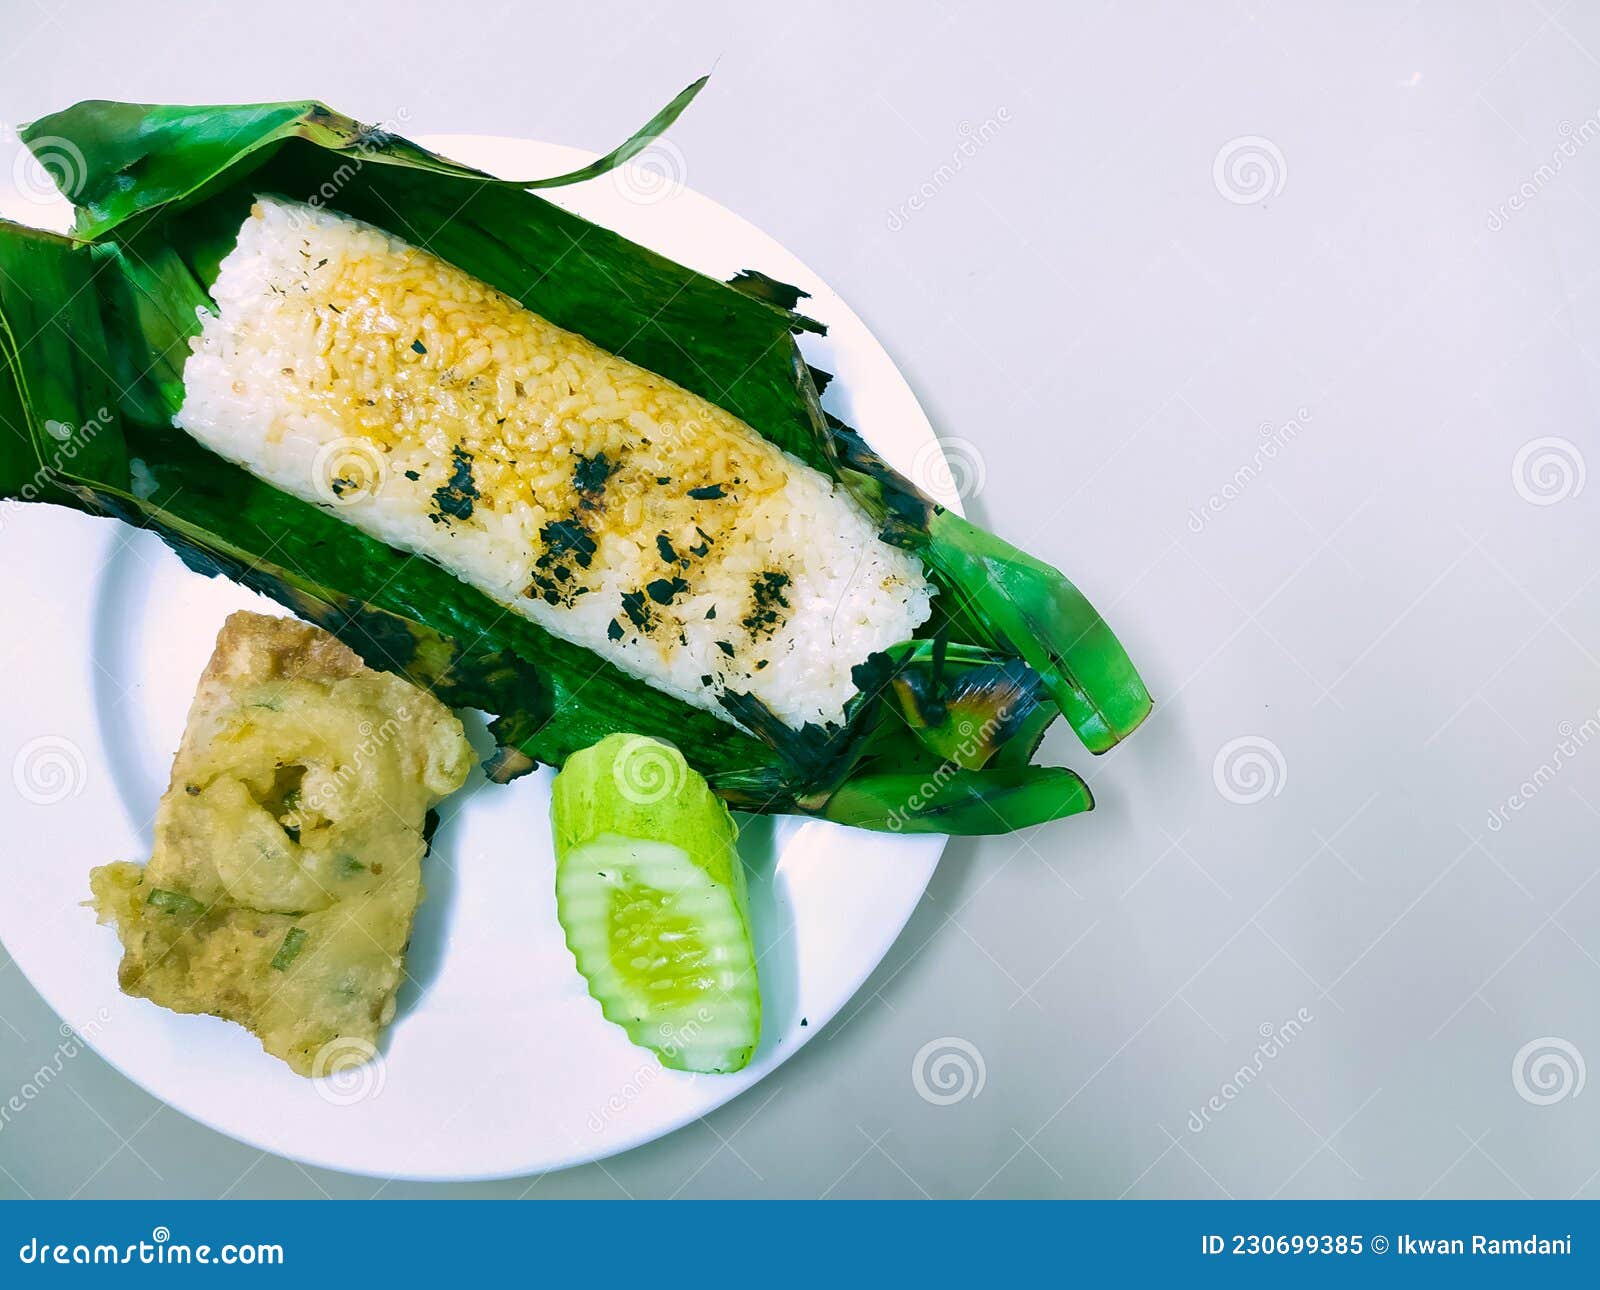 Grilled rice with fried tempeh wrapped in wheat flour